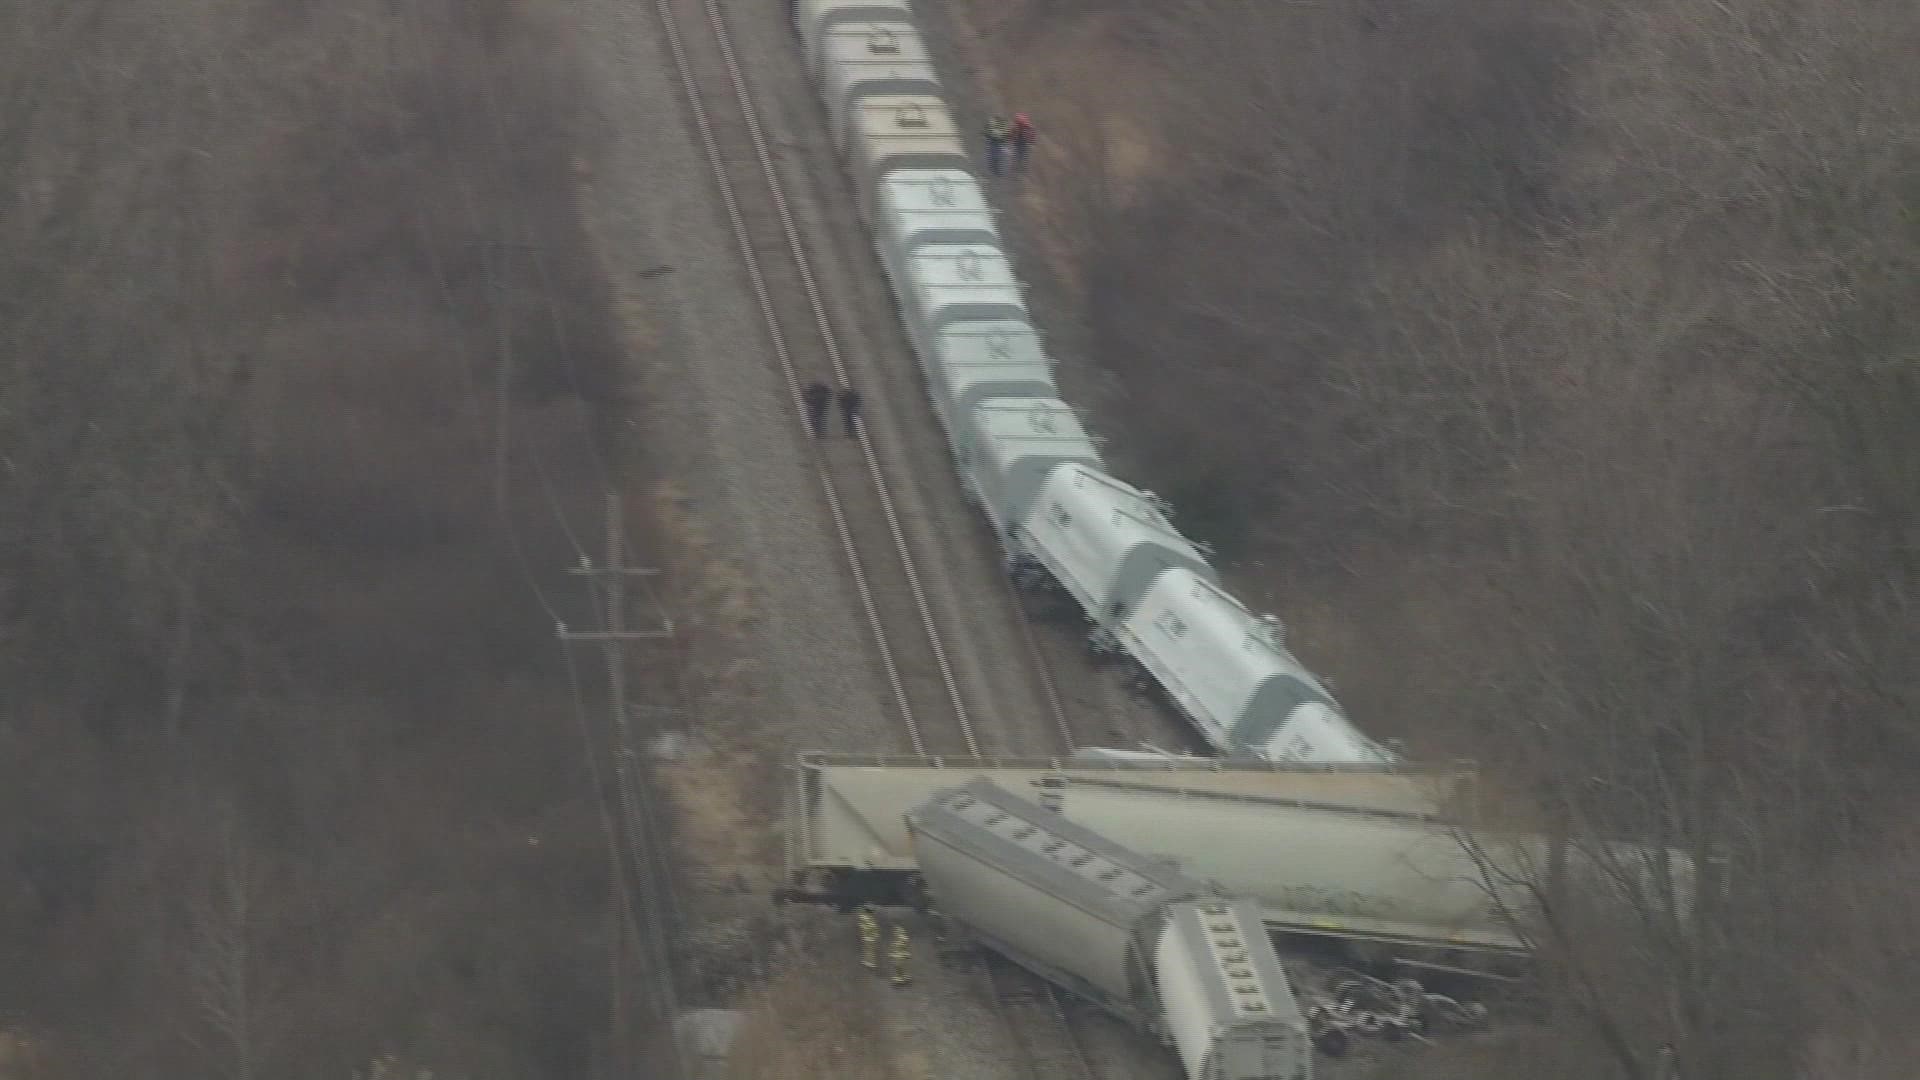 Emergency crews were on the scene of a freight train derailment Thursday near Detroit that sent several train cars off the tracks, officials said.